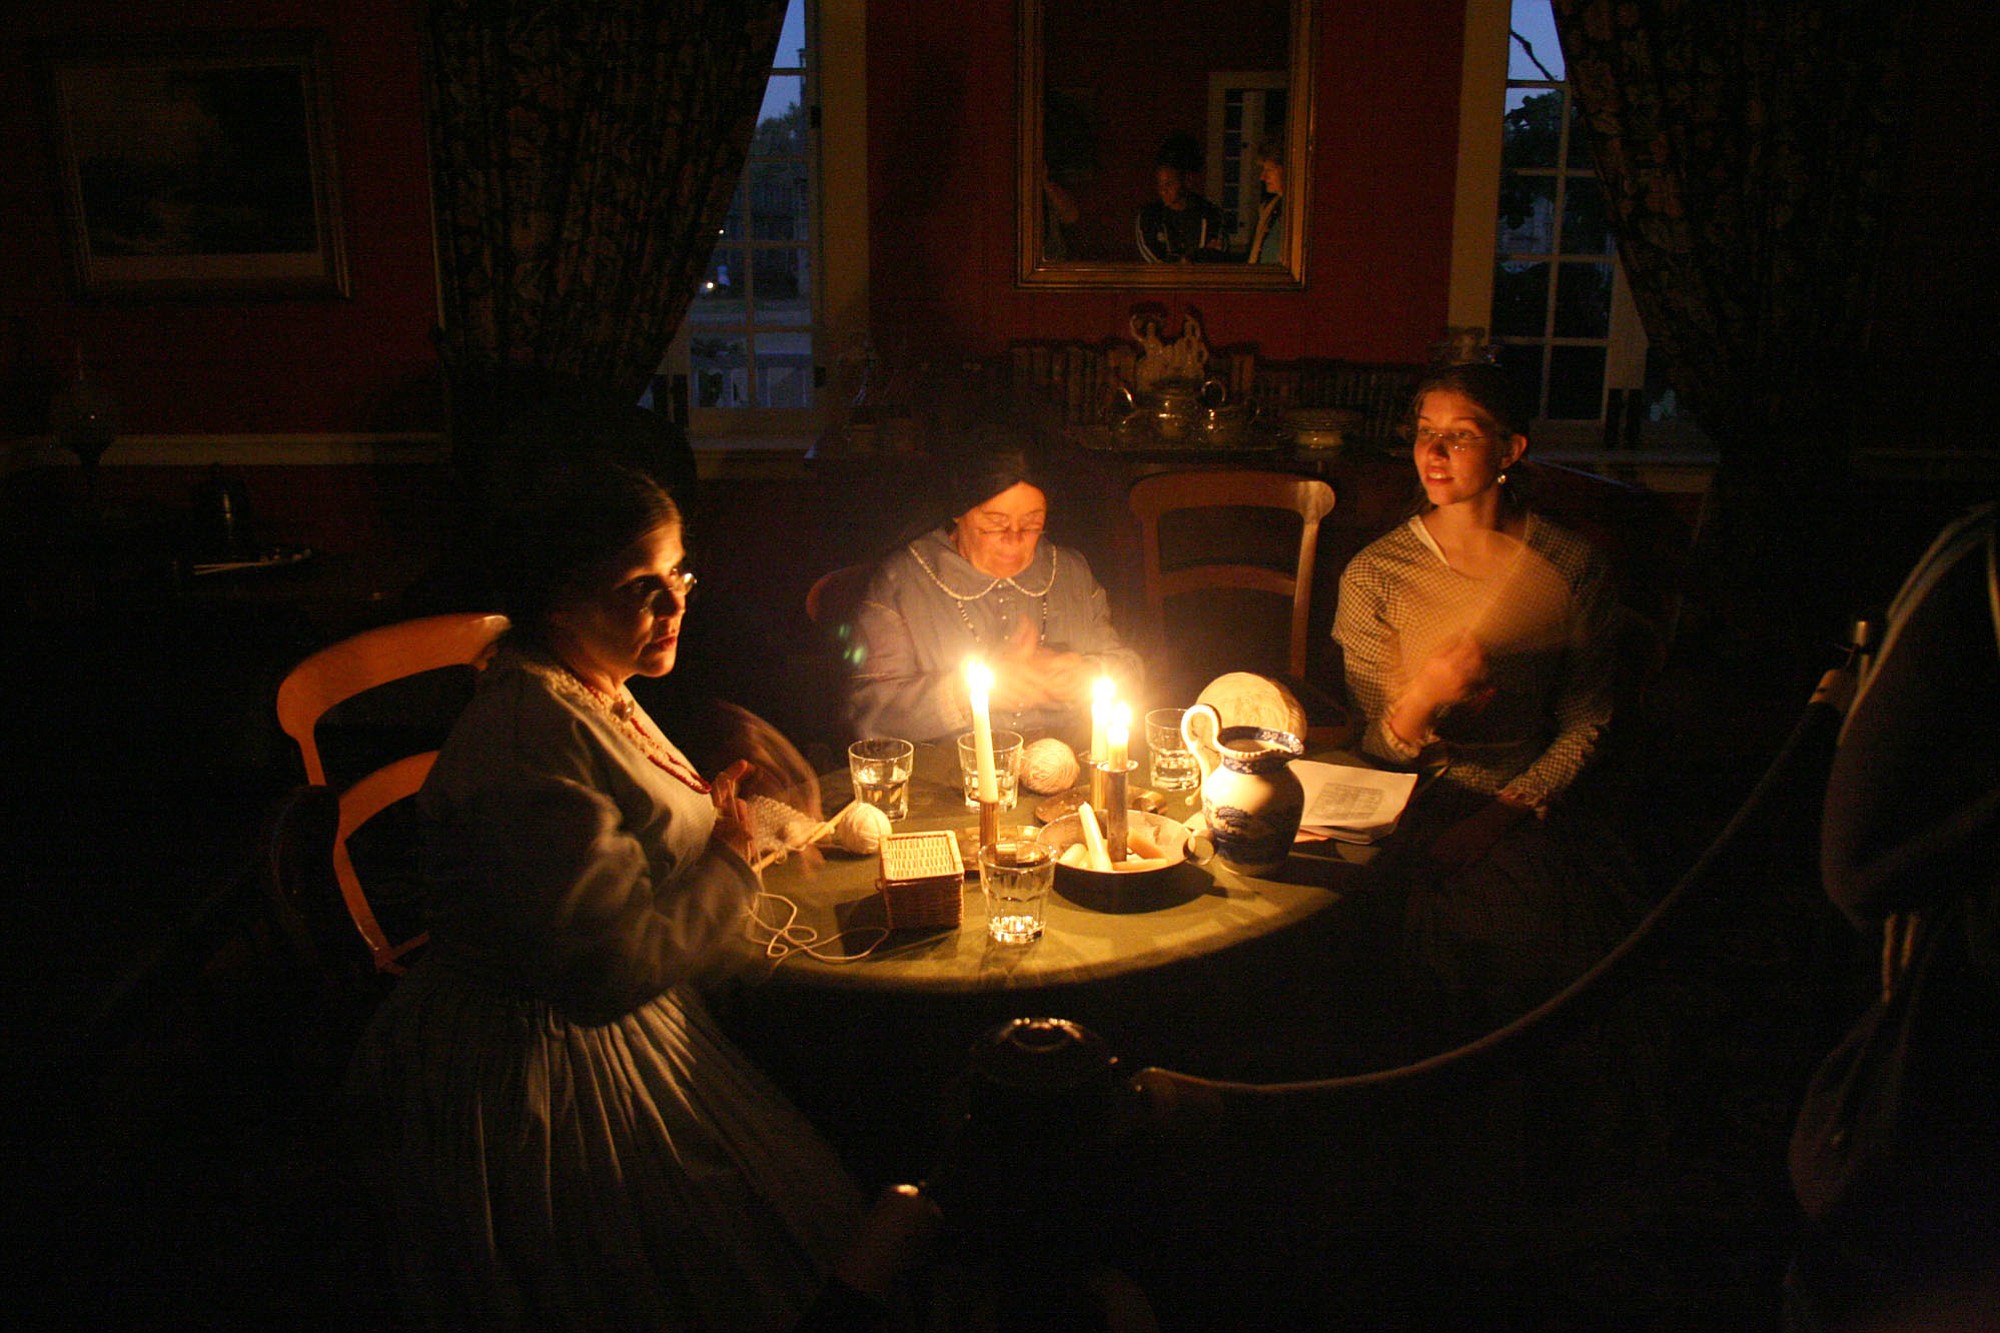 Actors portray life in the 1830s to 1850s through a series of vignettes during a Fort Vancouver Lantern Tour.